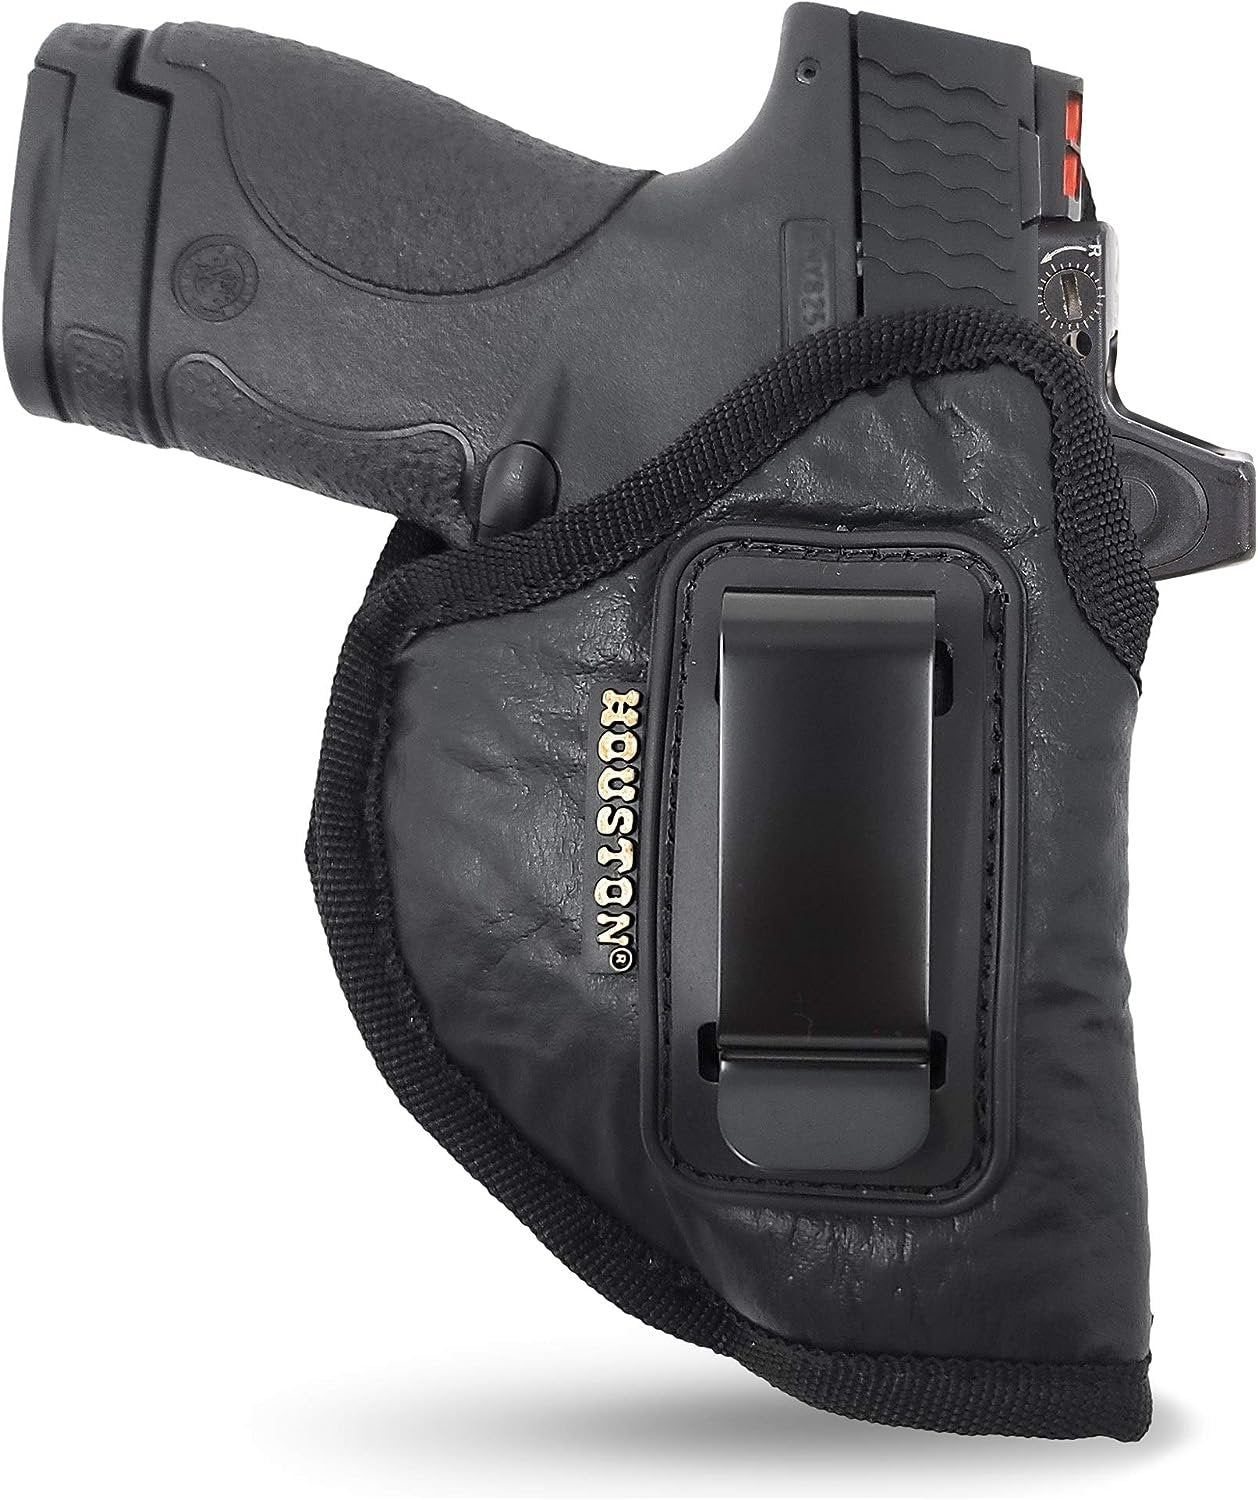 IWB Optical Gun Holster by Houston - ECO Leather Concealed Carry Soft Material | Fits Glck 26/27/33, Shield, XDS, Taurus 709, Taurus Pro C, Walther P22, Beretta Nano, SCCY Sky.Rug LC9 (Right) Black